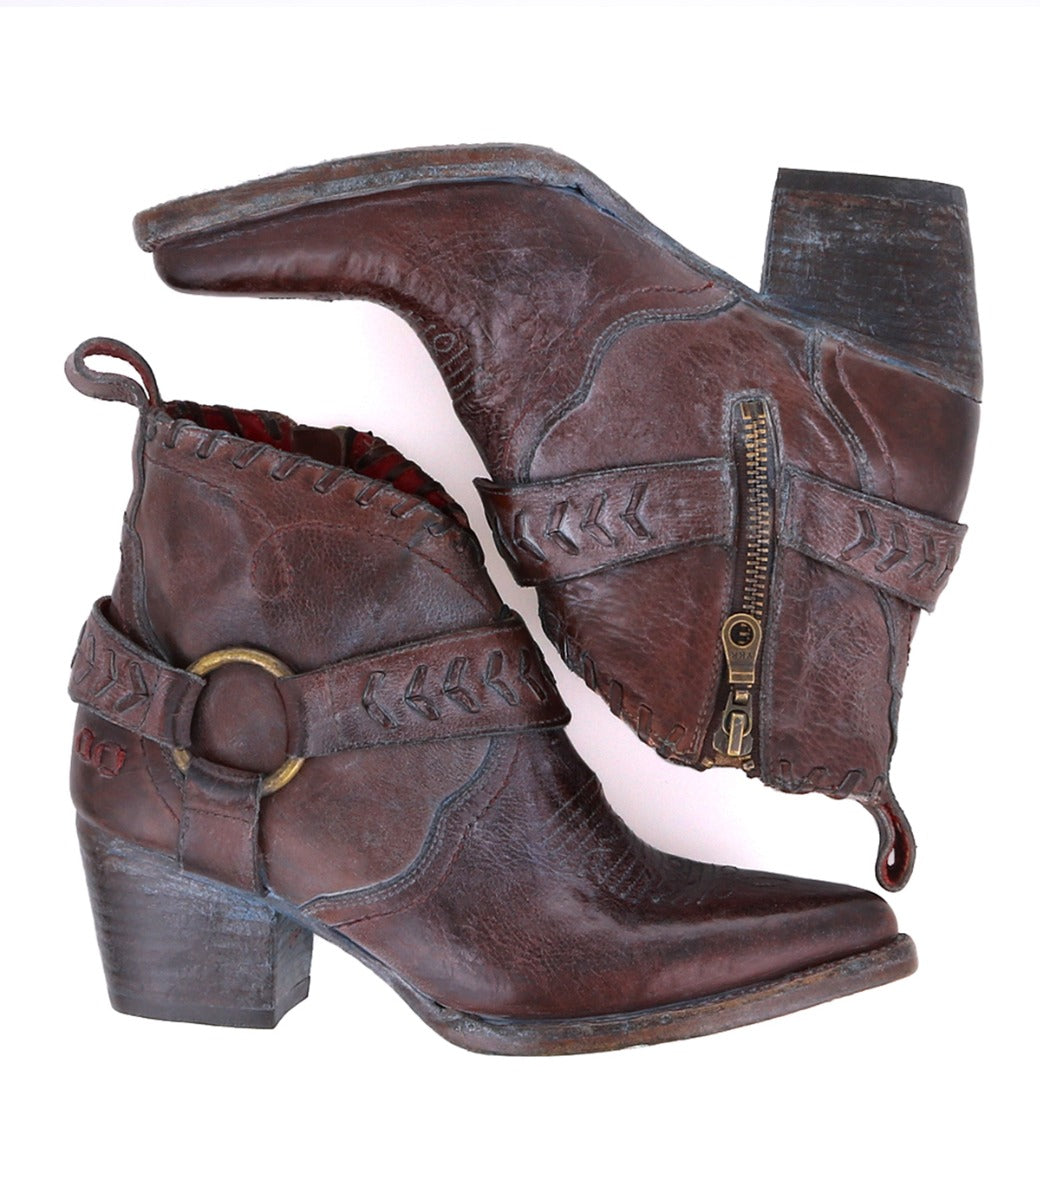 A pair of Tania boots by Bed Stu with buckles.